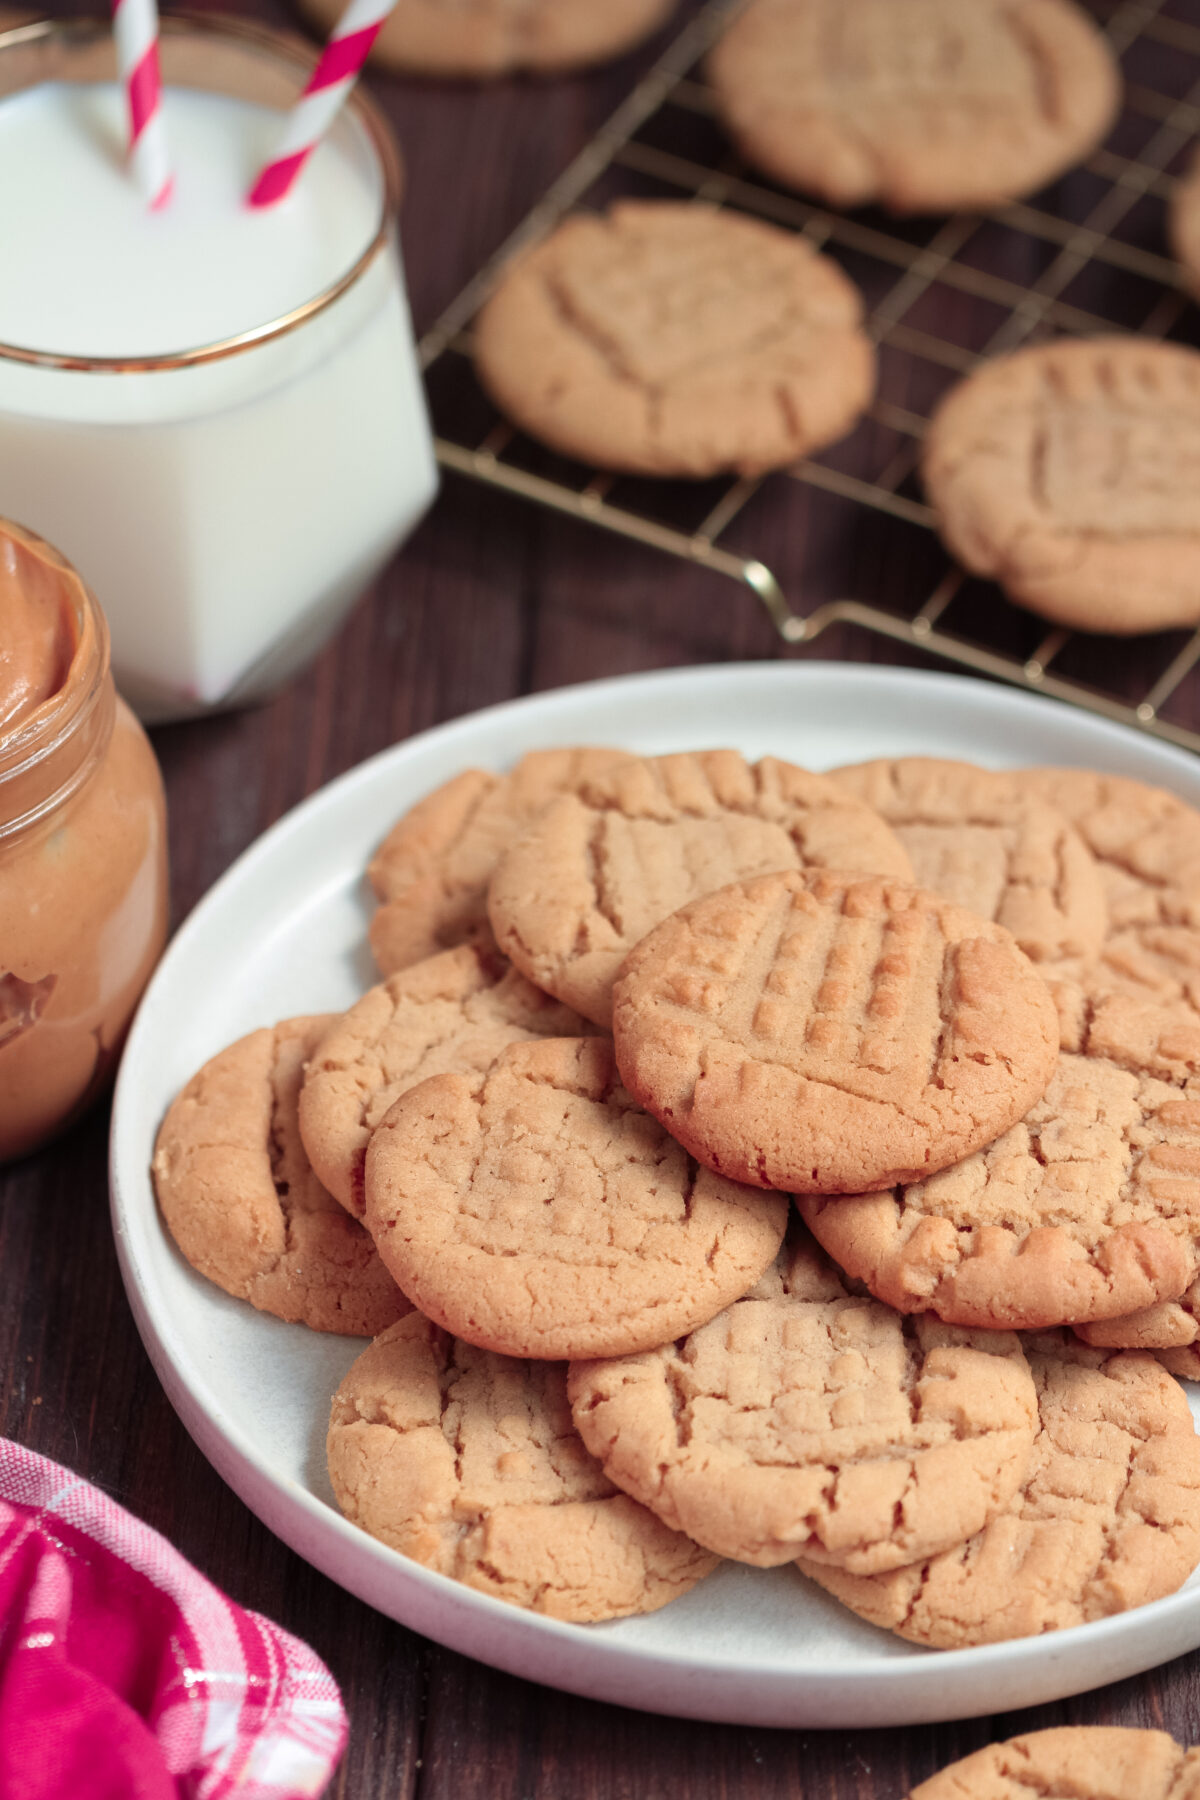 Craving some delicious peanut butter cookies? These classic cookies are crispy on the outside, and soft and chewy on the inside.